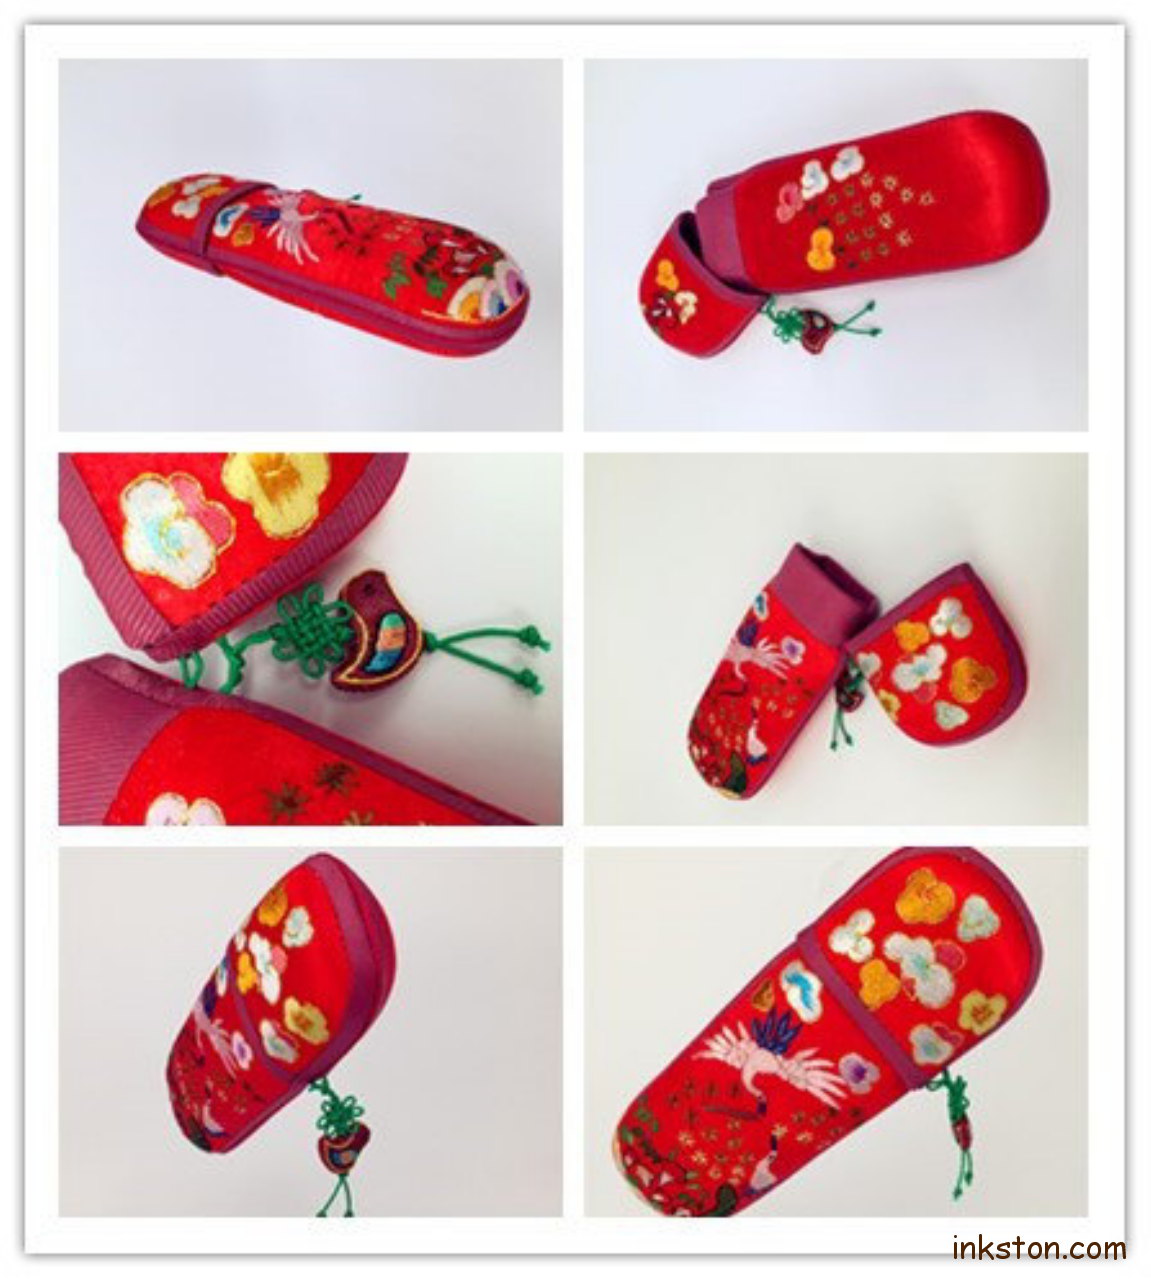 Glasses Case - Slim - Graphic and Abstract Designs by Laarni and Tita – The  Handmade Showroom